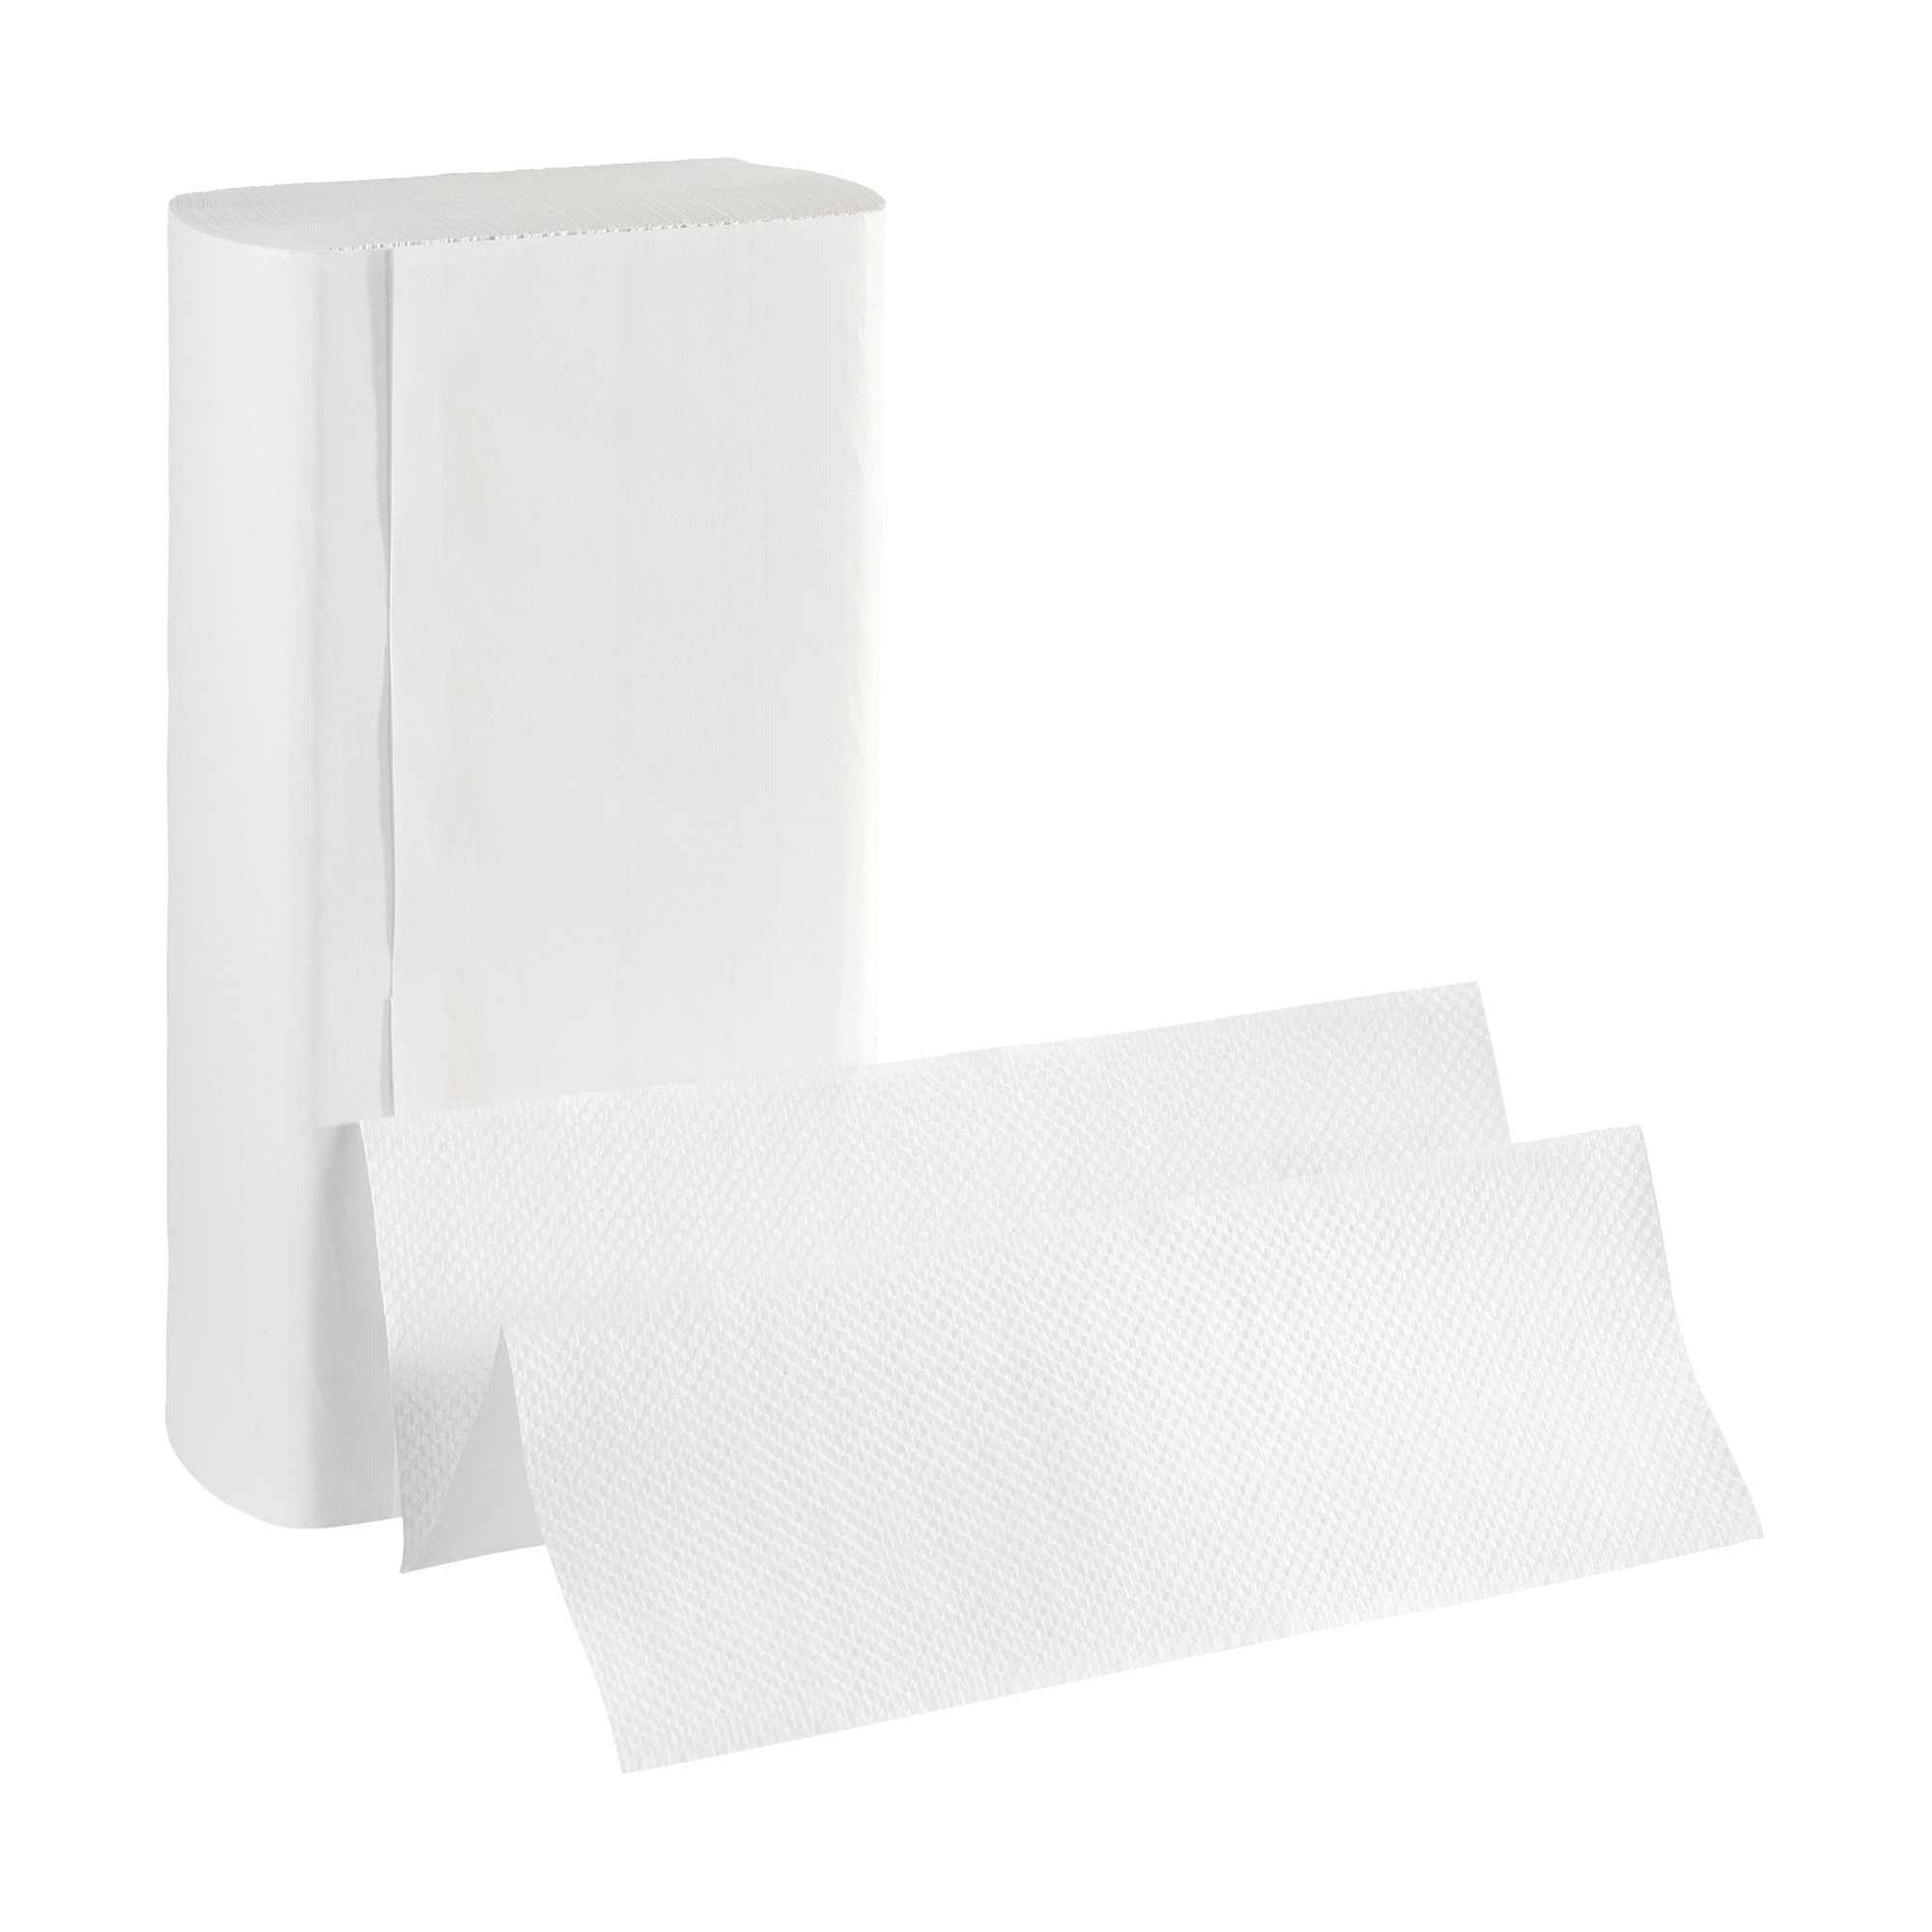 20389 WHITE MULTIFOLD TOWEL 4M/CSPREFERENCE